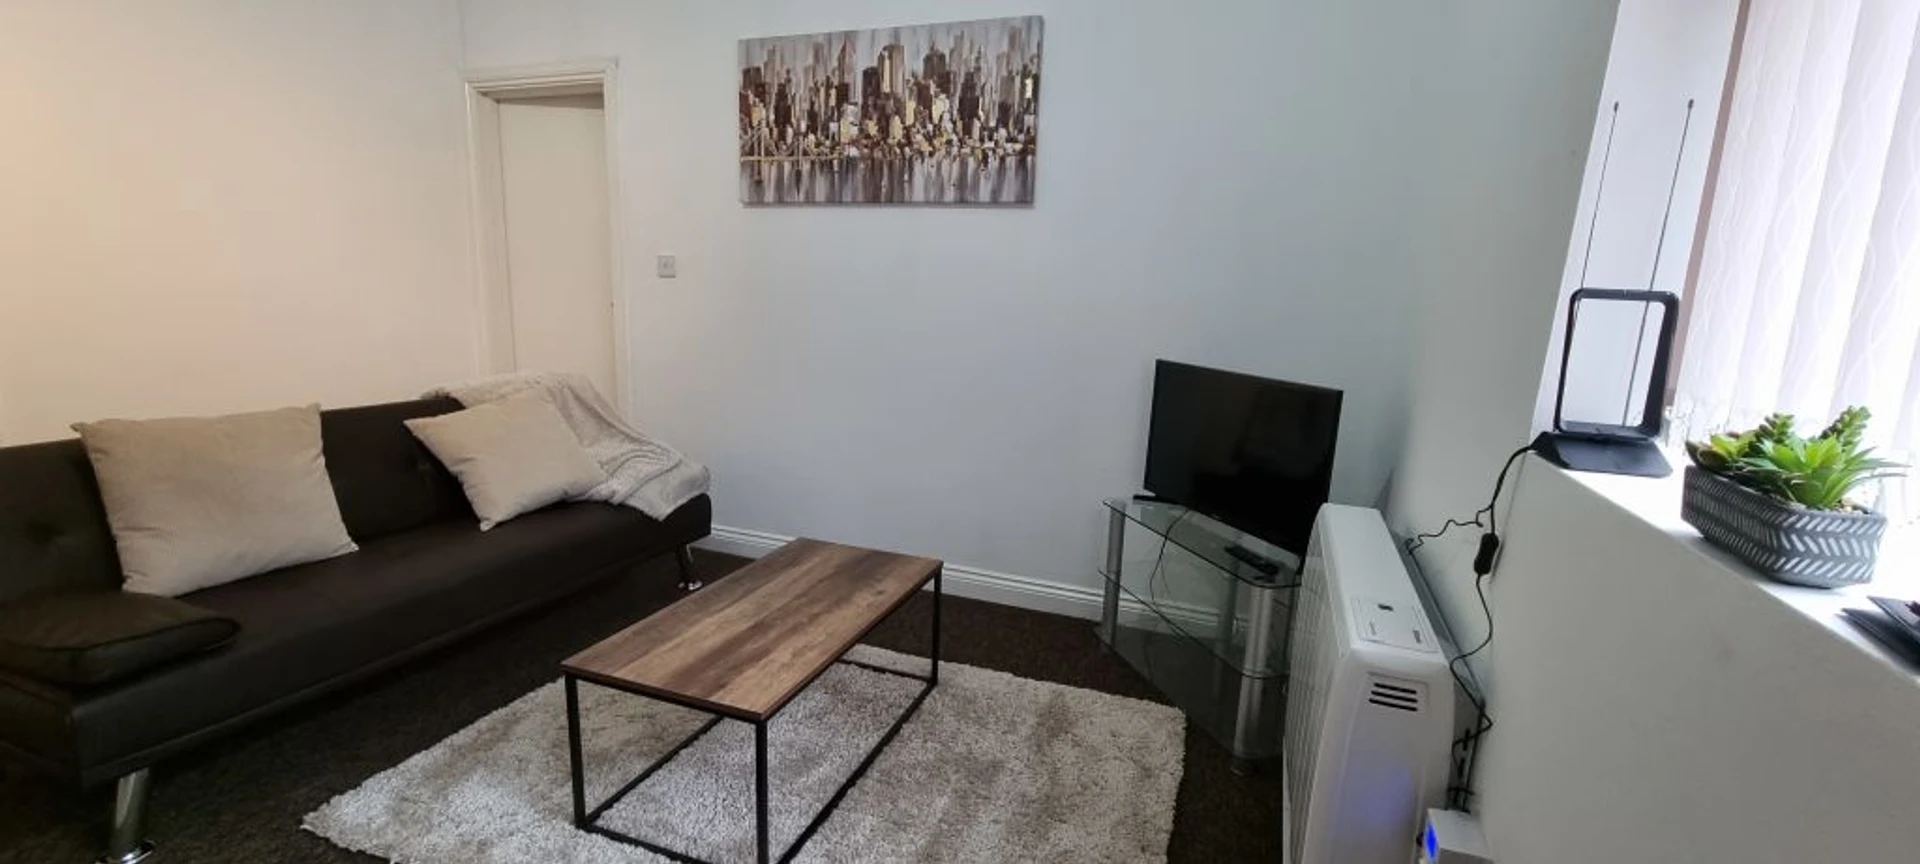 Entire fully furnished flat in Leicester